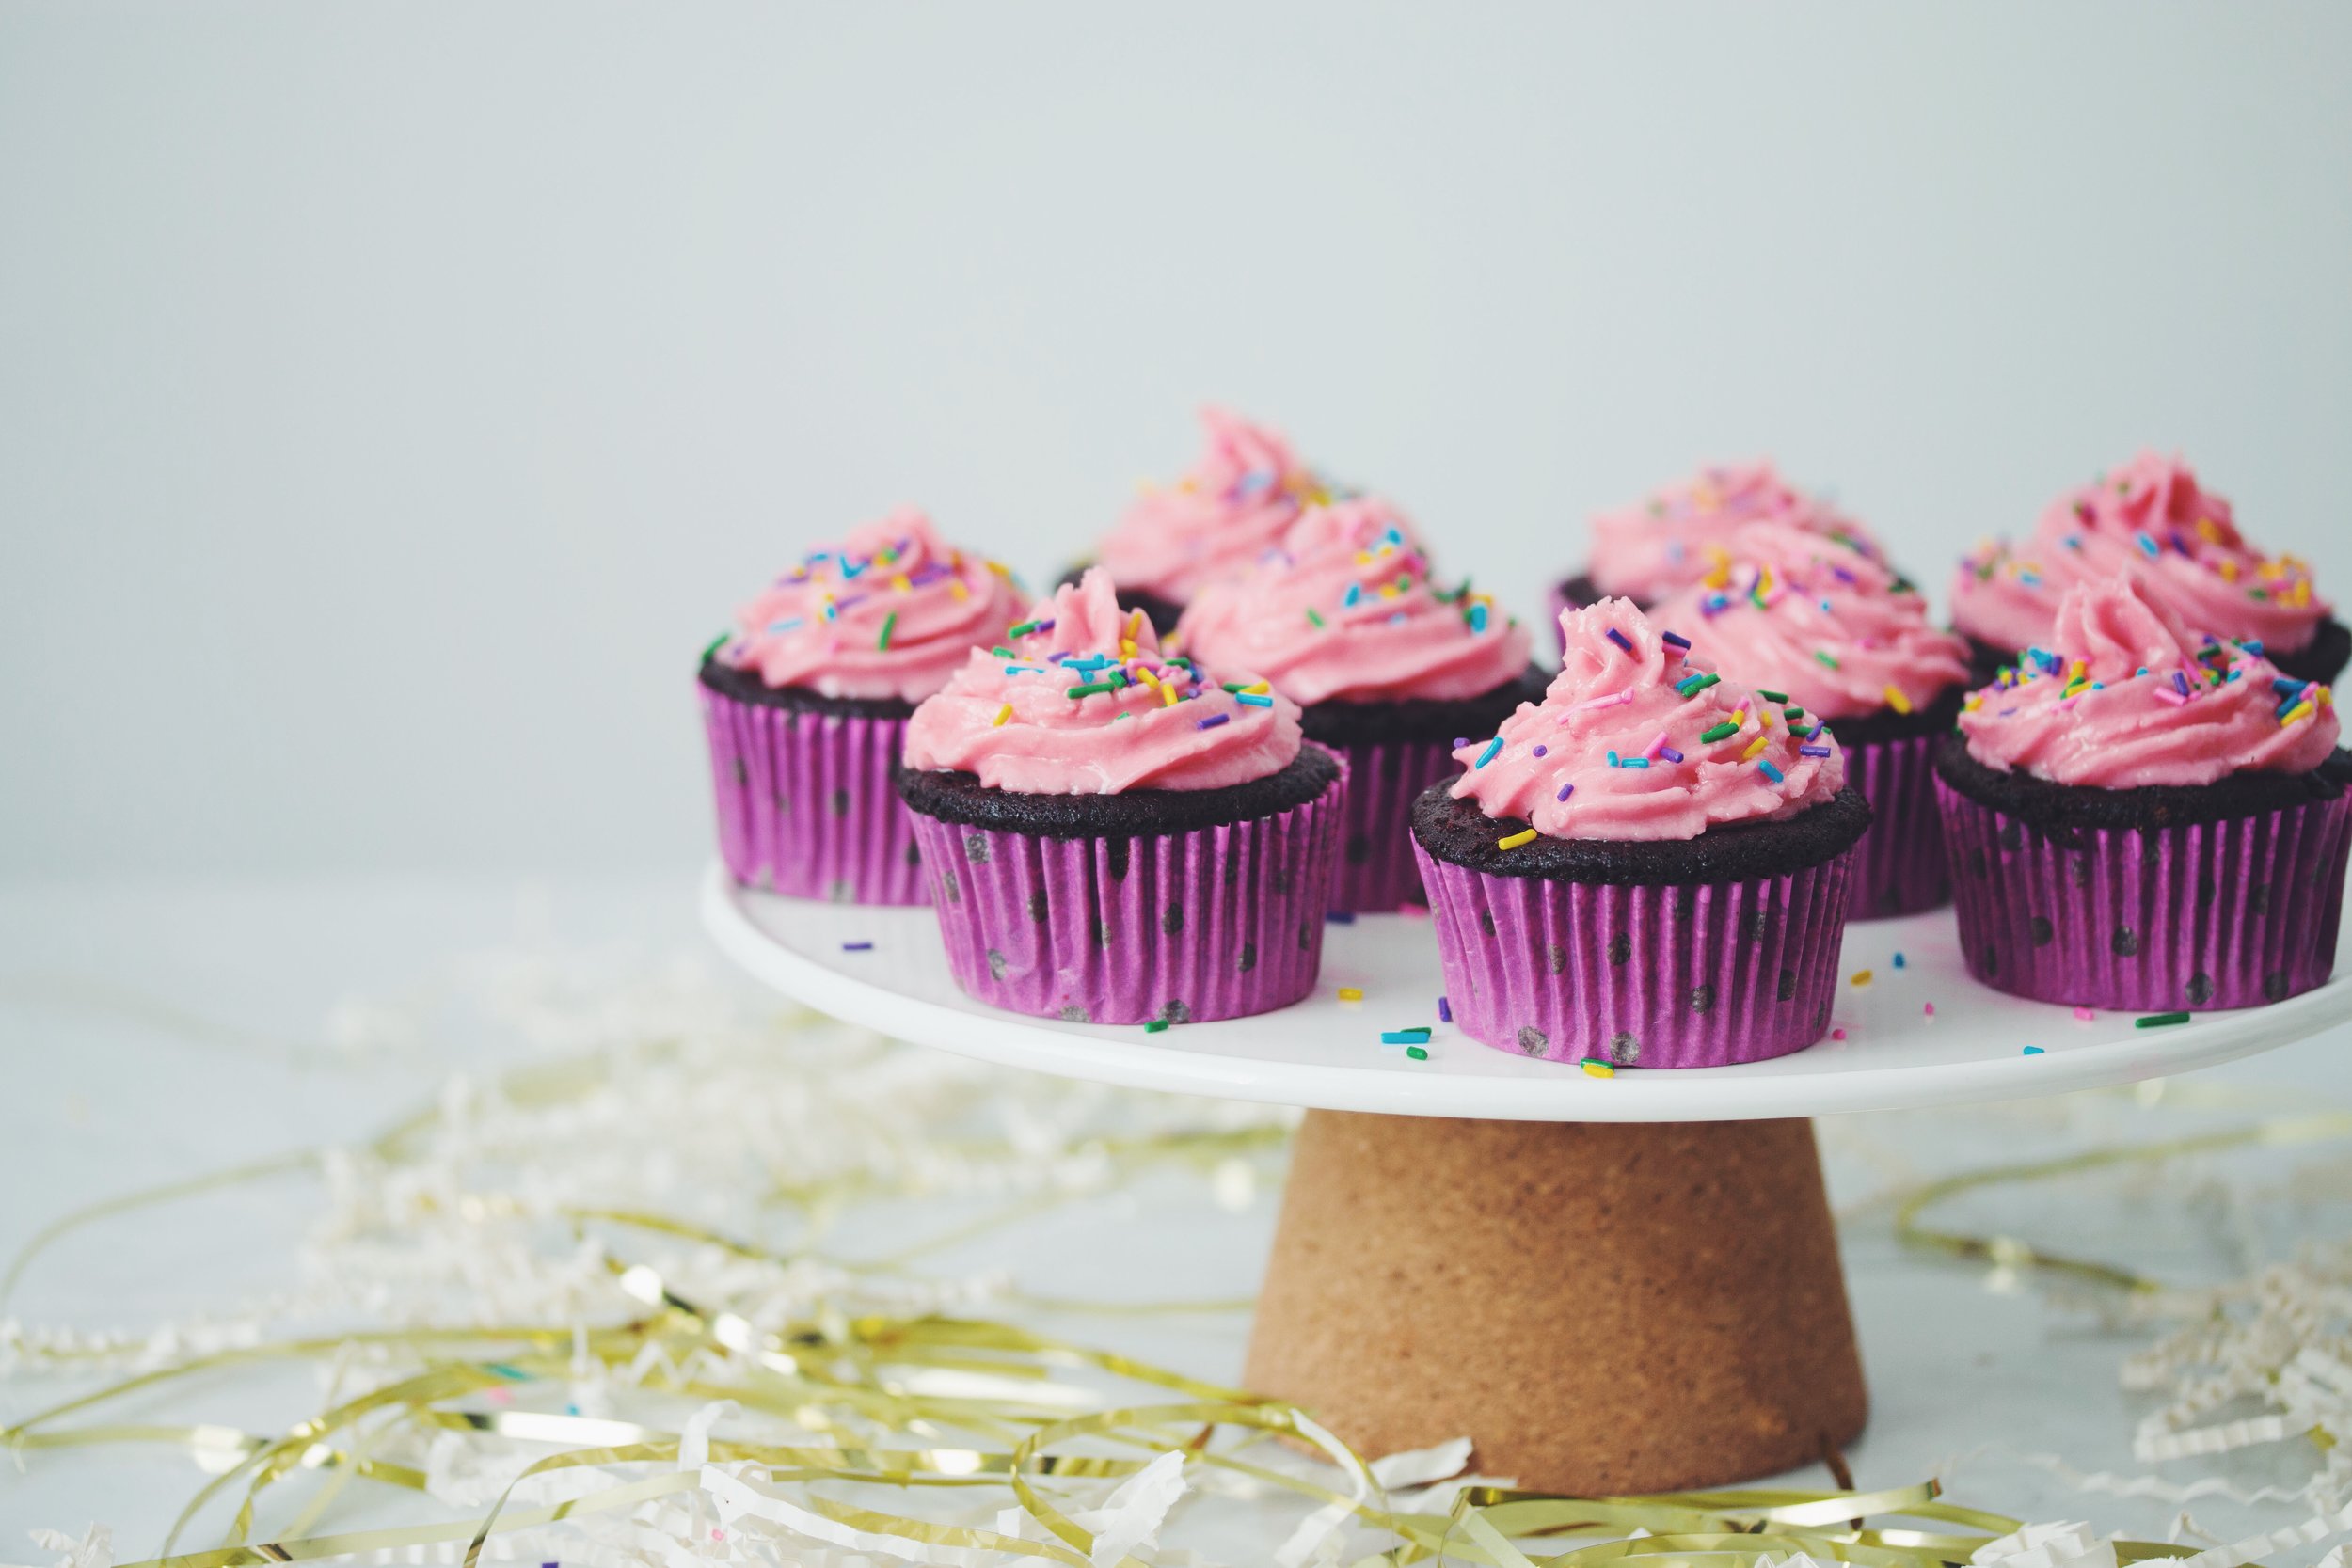 Vegan Chocolate Cupcakes With Raspberry Buttercream Frosting